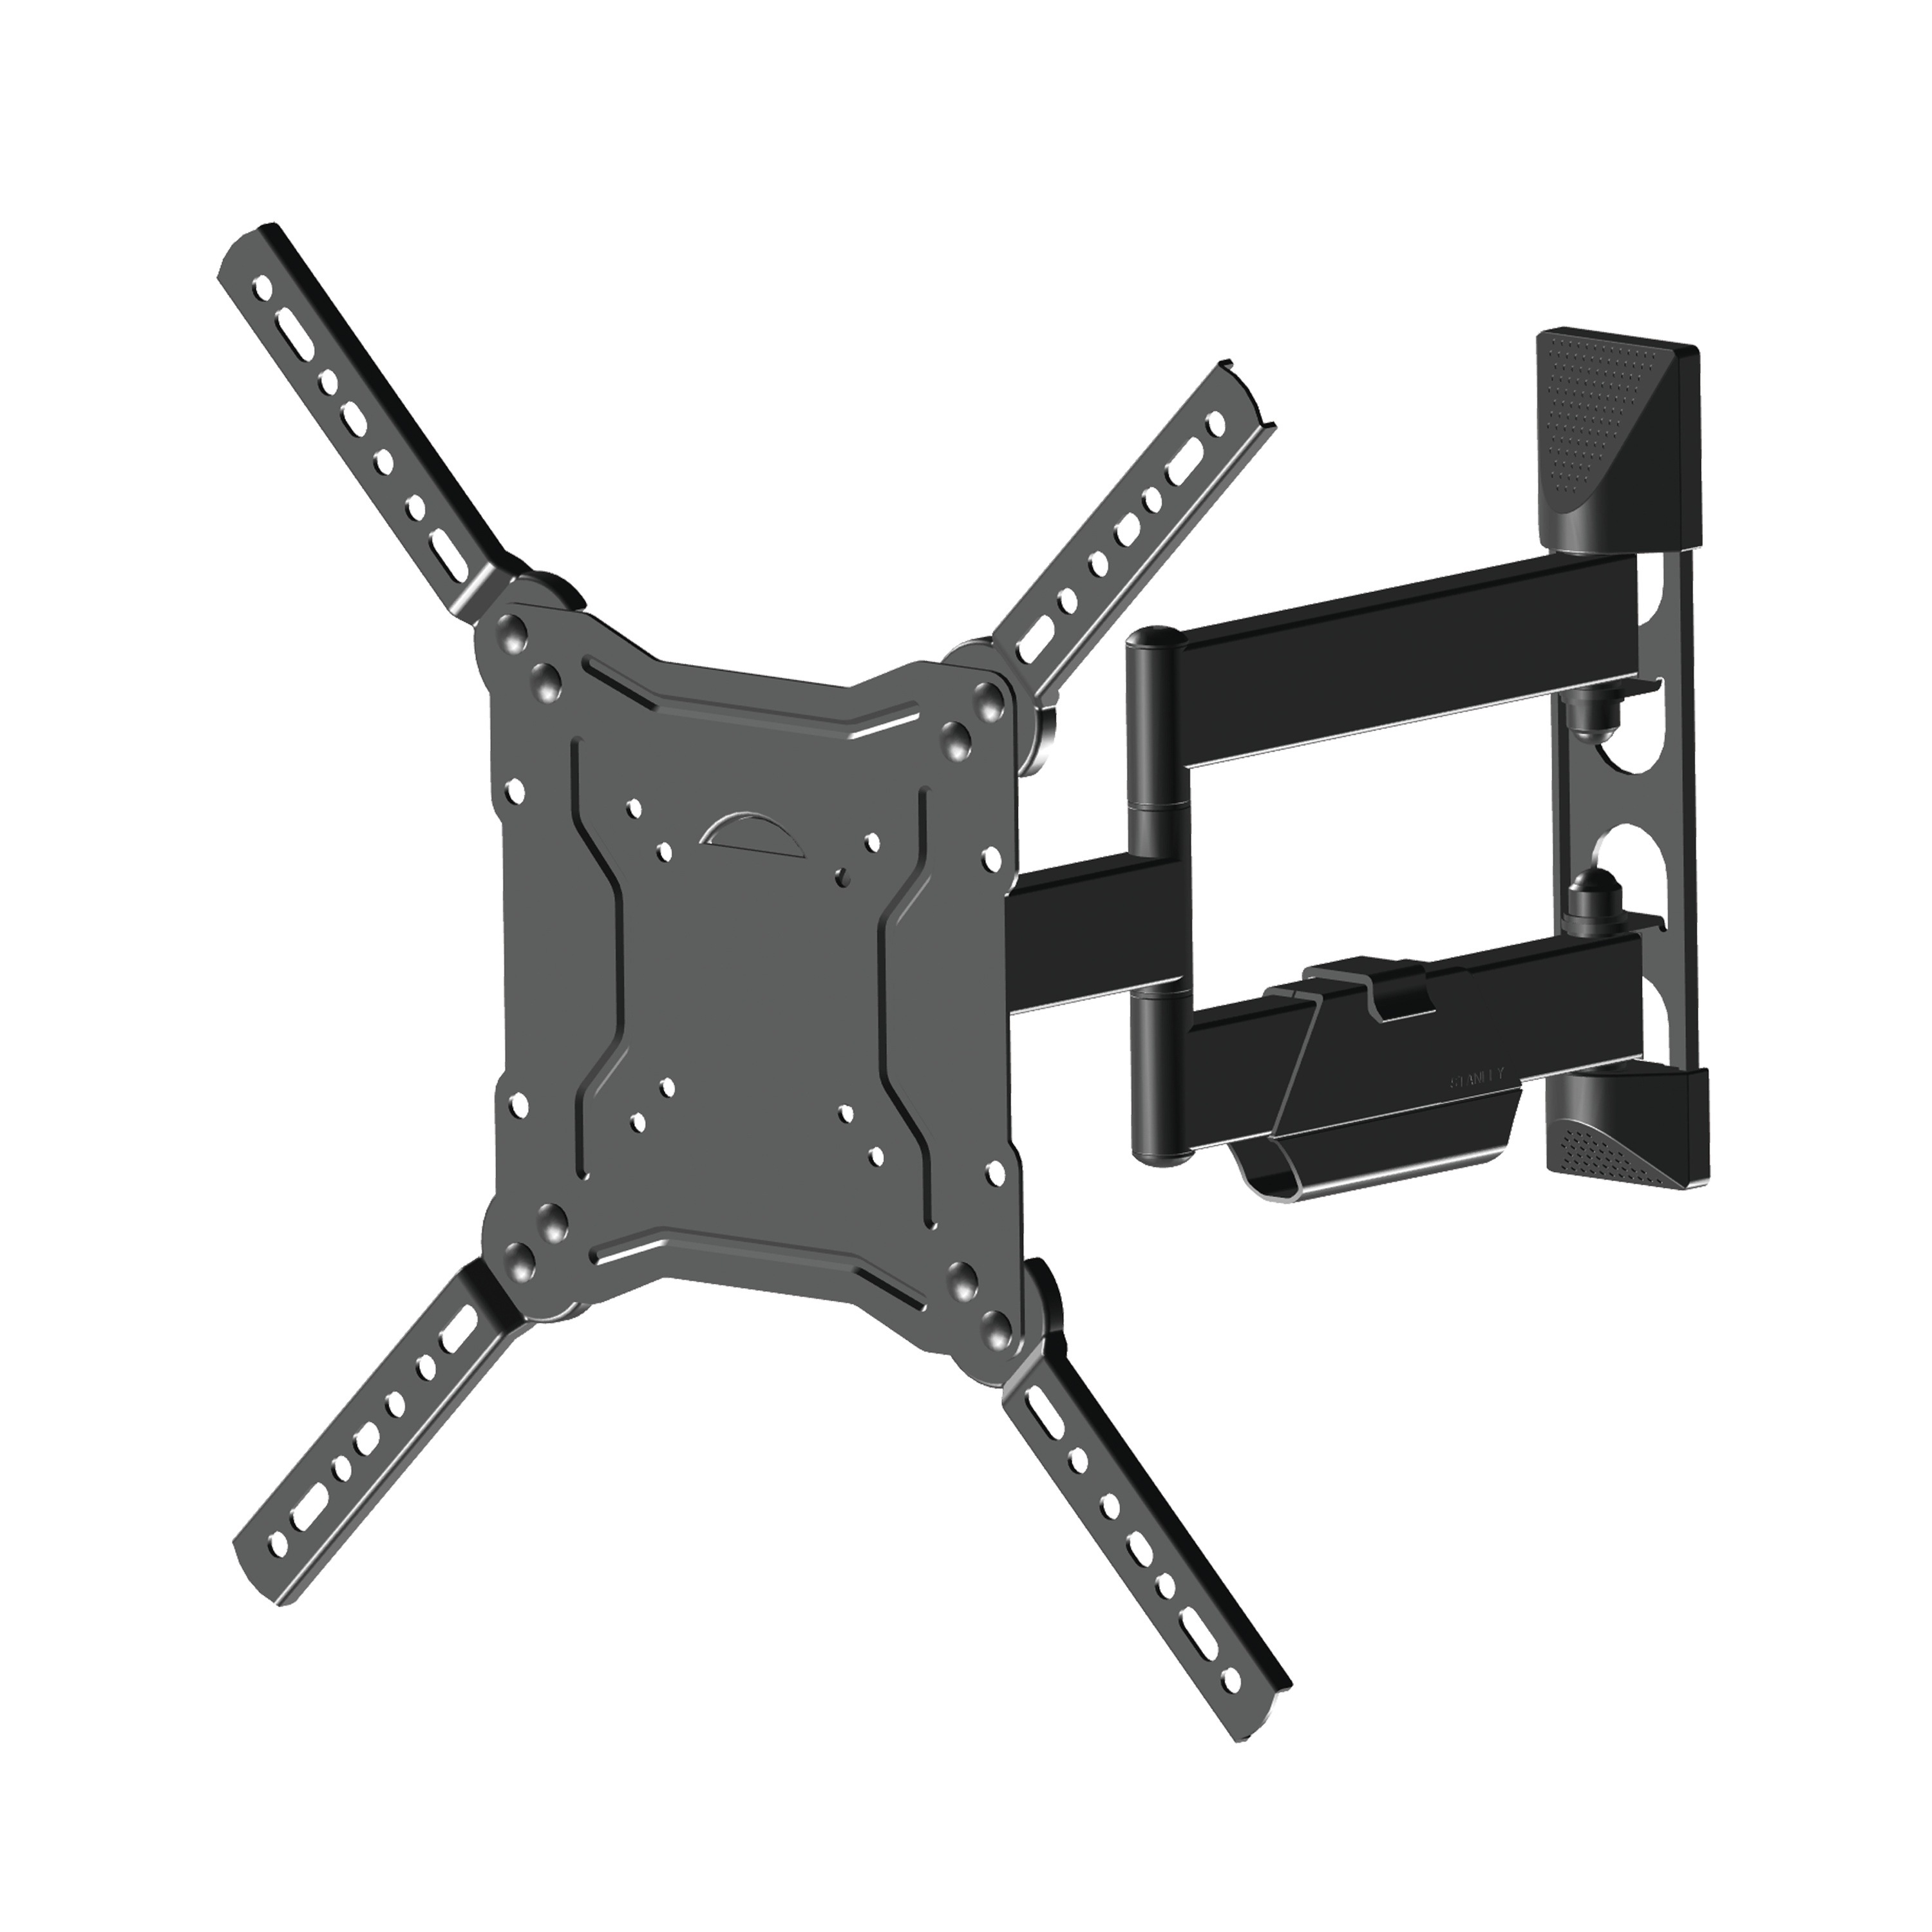 Stanley Tools - Slim Full Motion Articulating Mount for Large Flat Panel Television 23 in  60 in - TMX-104FM